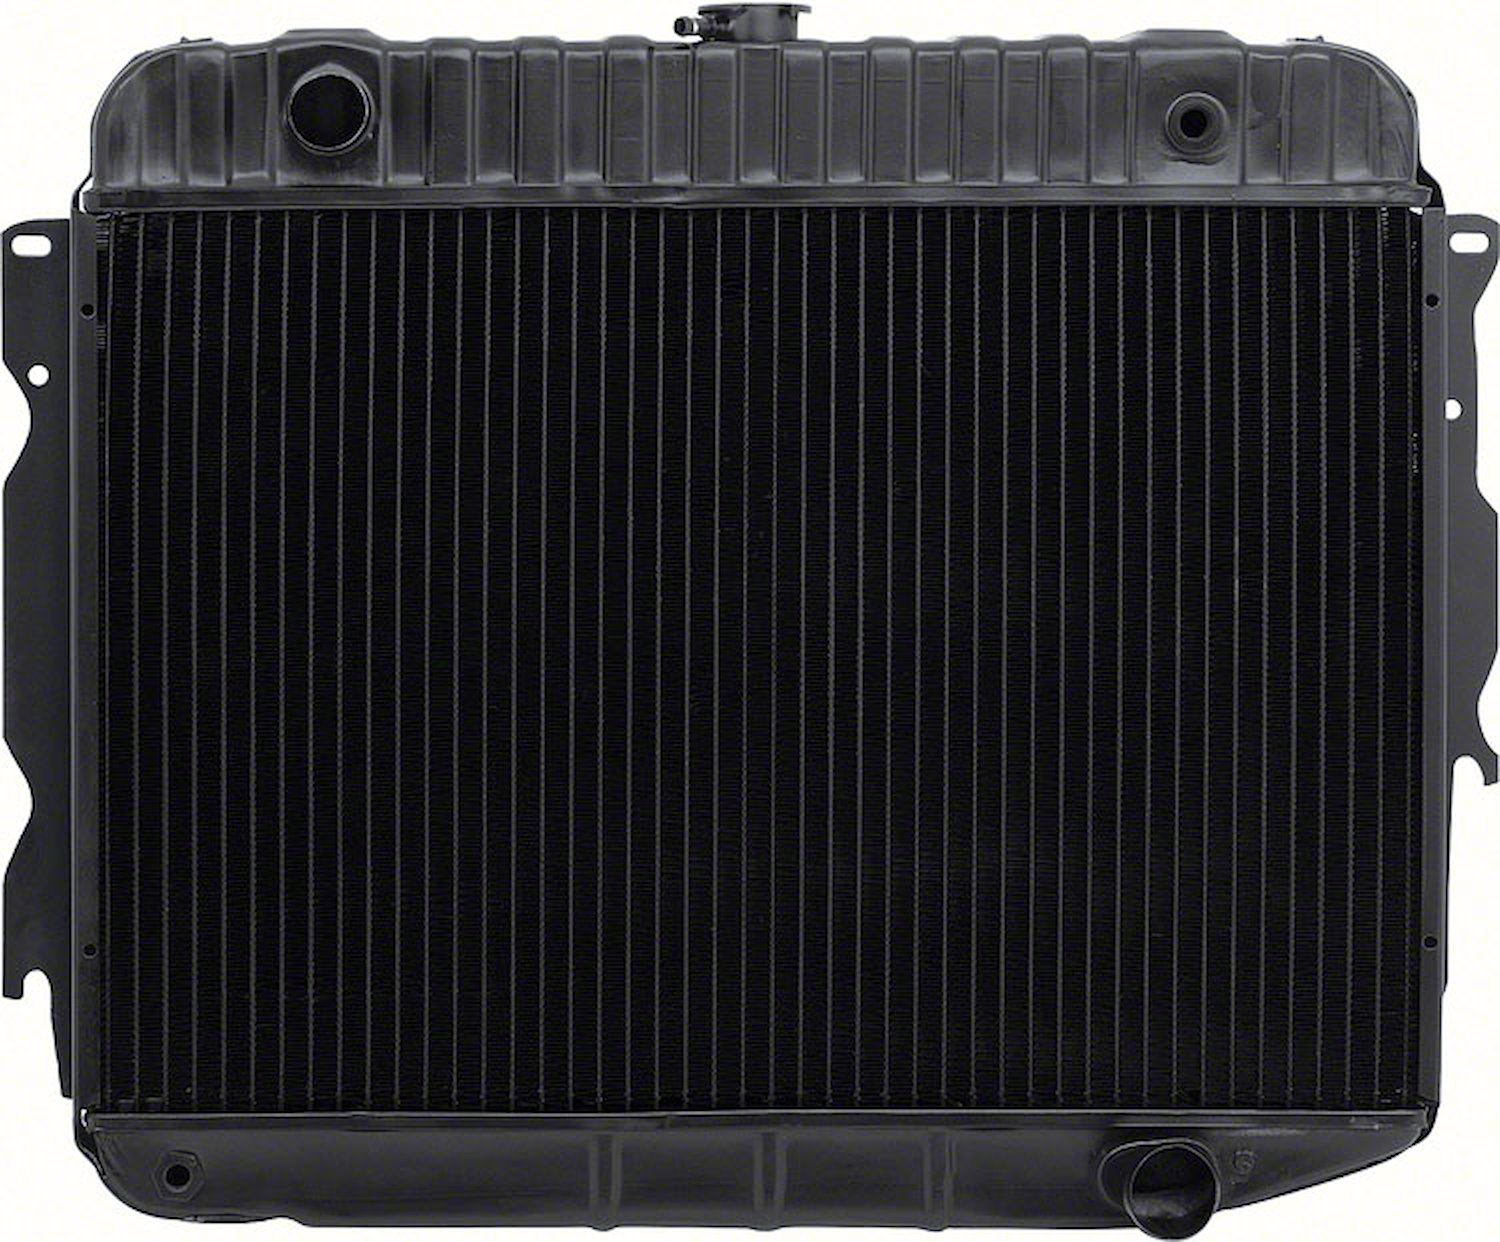 MD2292S Replacement Radiator 1973 Mopar B/E-Body Small Block V8 With Standard Trans 3 Row 26" Wide